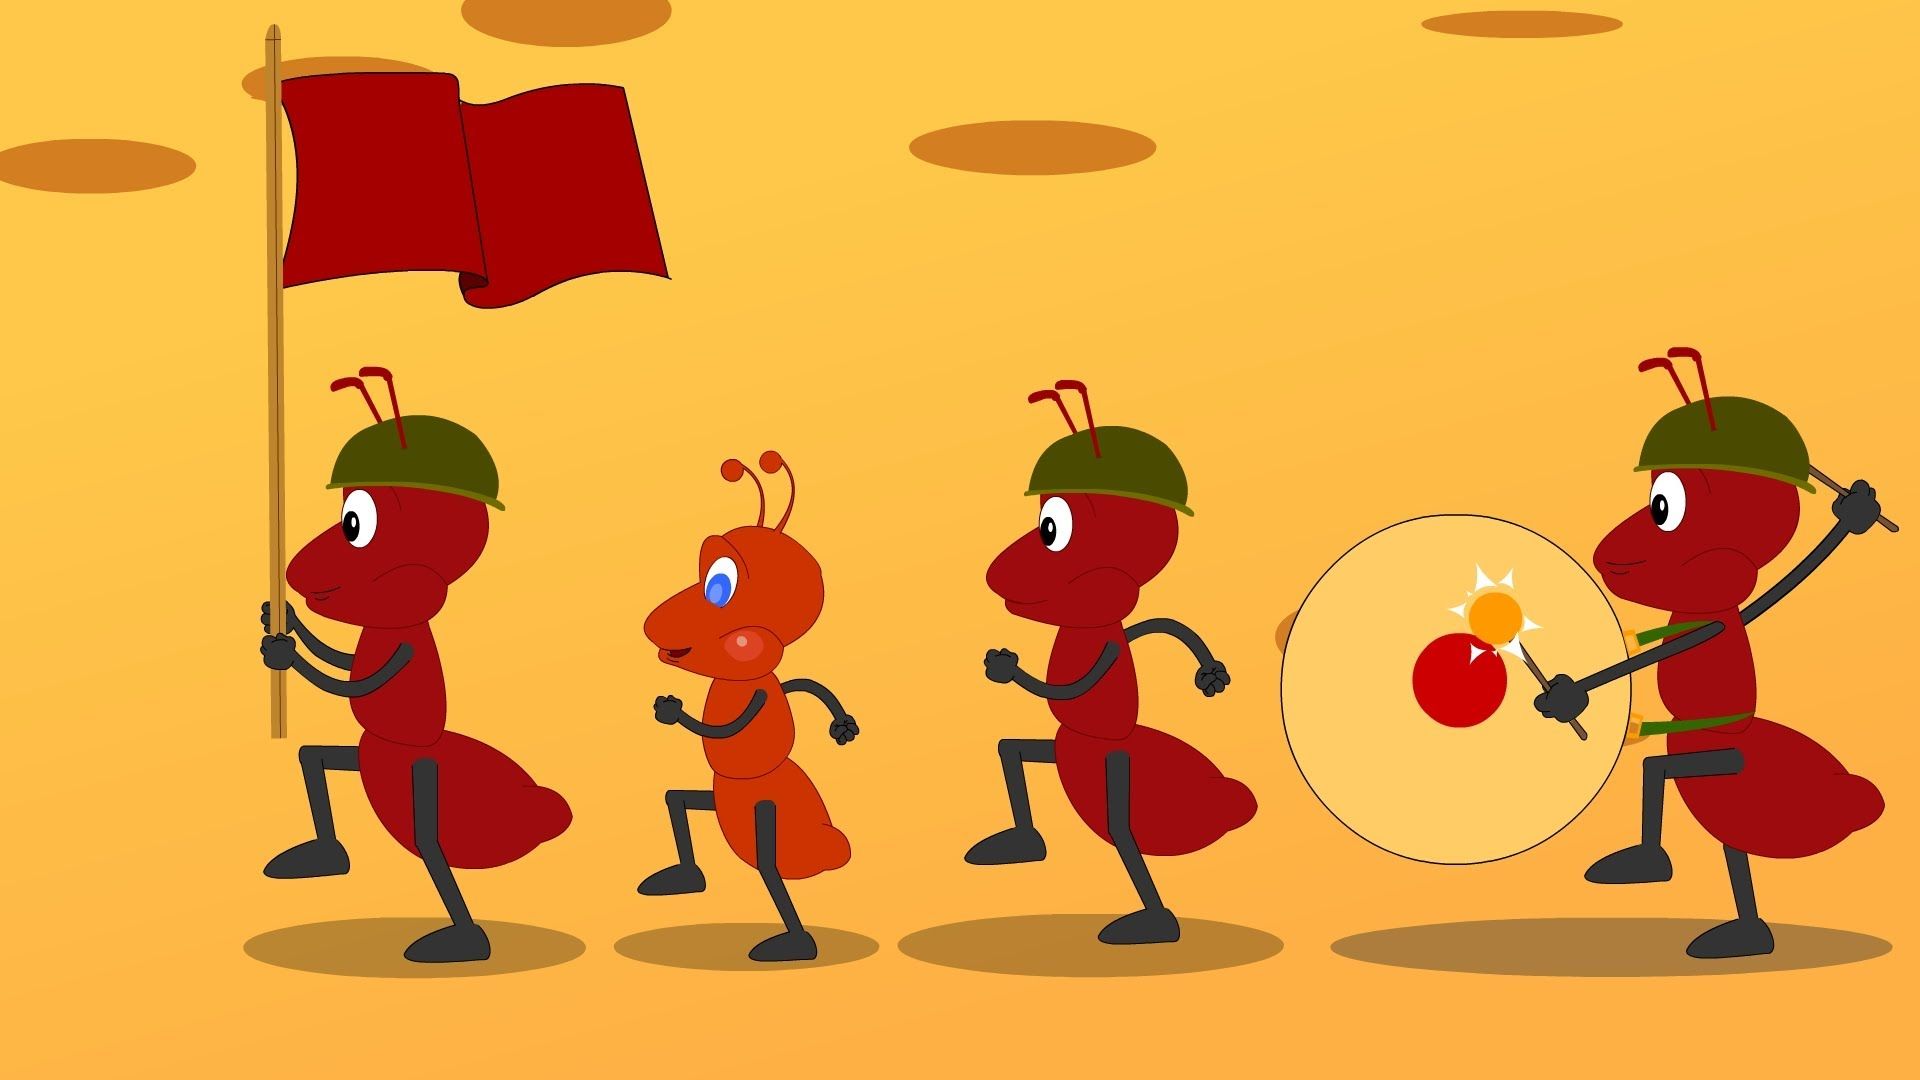 Ant clipart ants marching. This is a parody